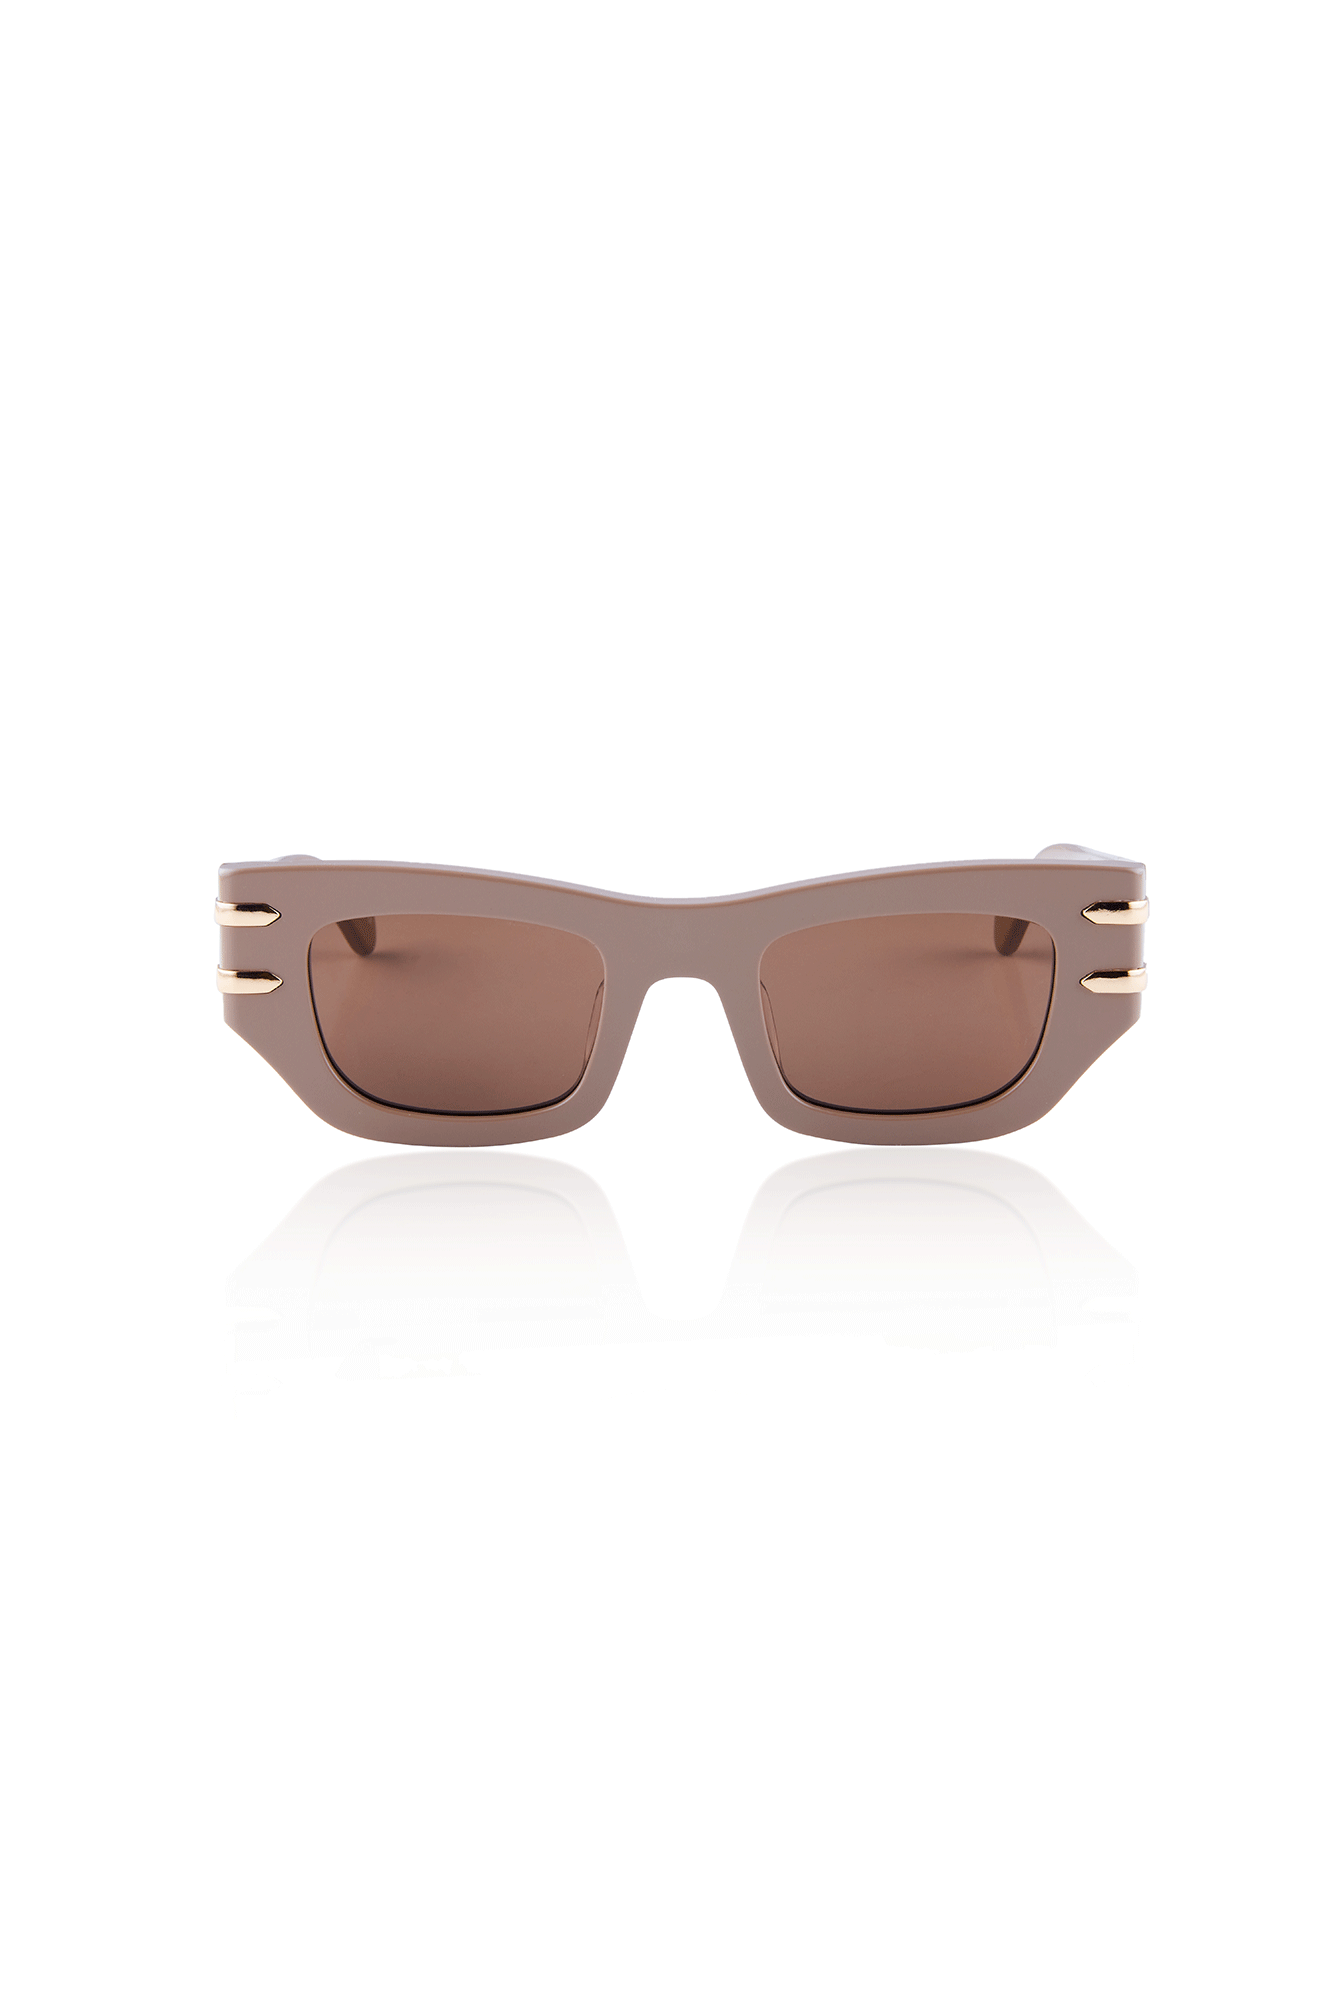 Made in Japan Neutral sunglasses from Oscar x Frank is an exclusive limited edition eyewear crafted exclusively by eyewear artists in Sabae, Japan. 100% handcrafted from bio-acetate, this stylish and timeless piece offers customers lasting quality and comfort.